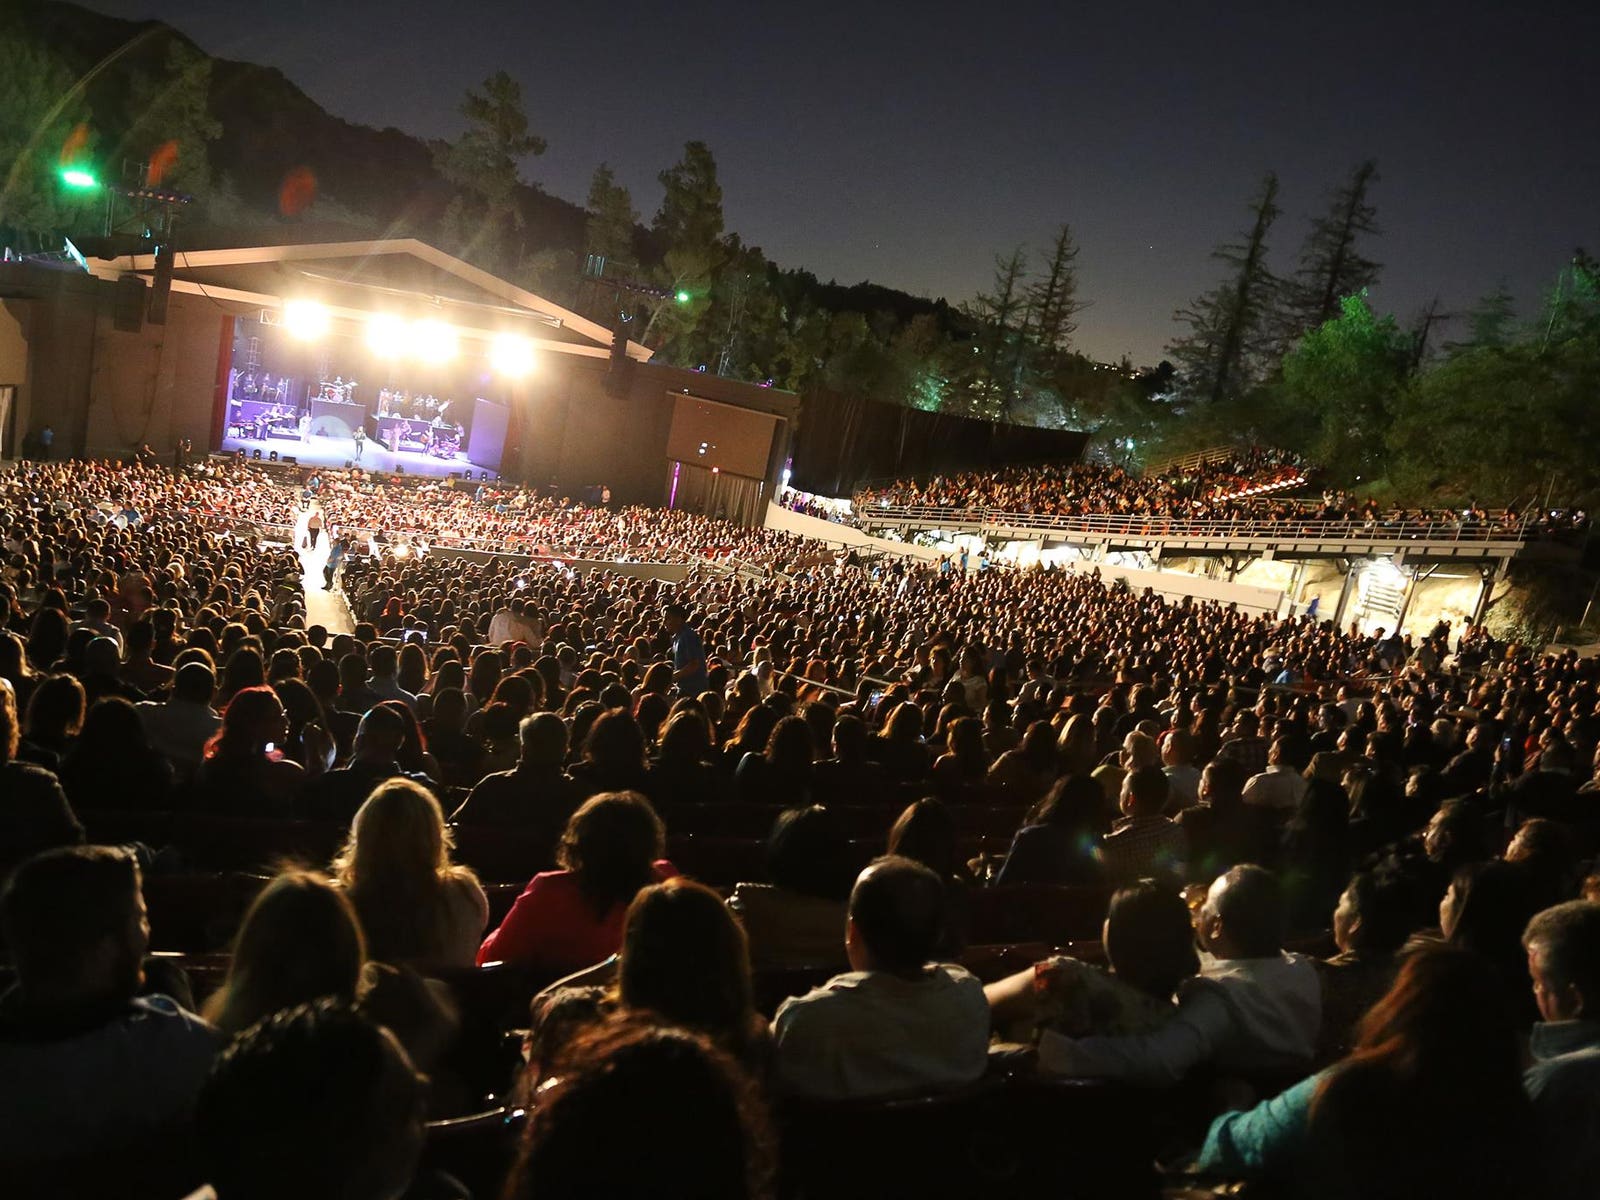 Concert at The Greek Theatre